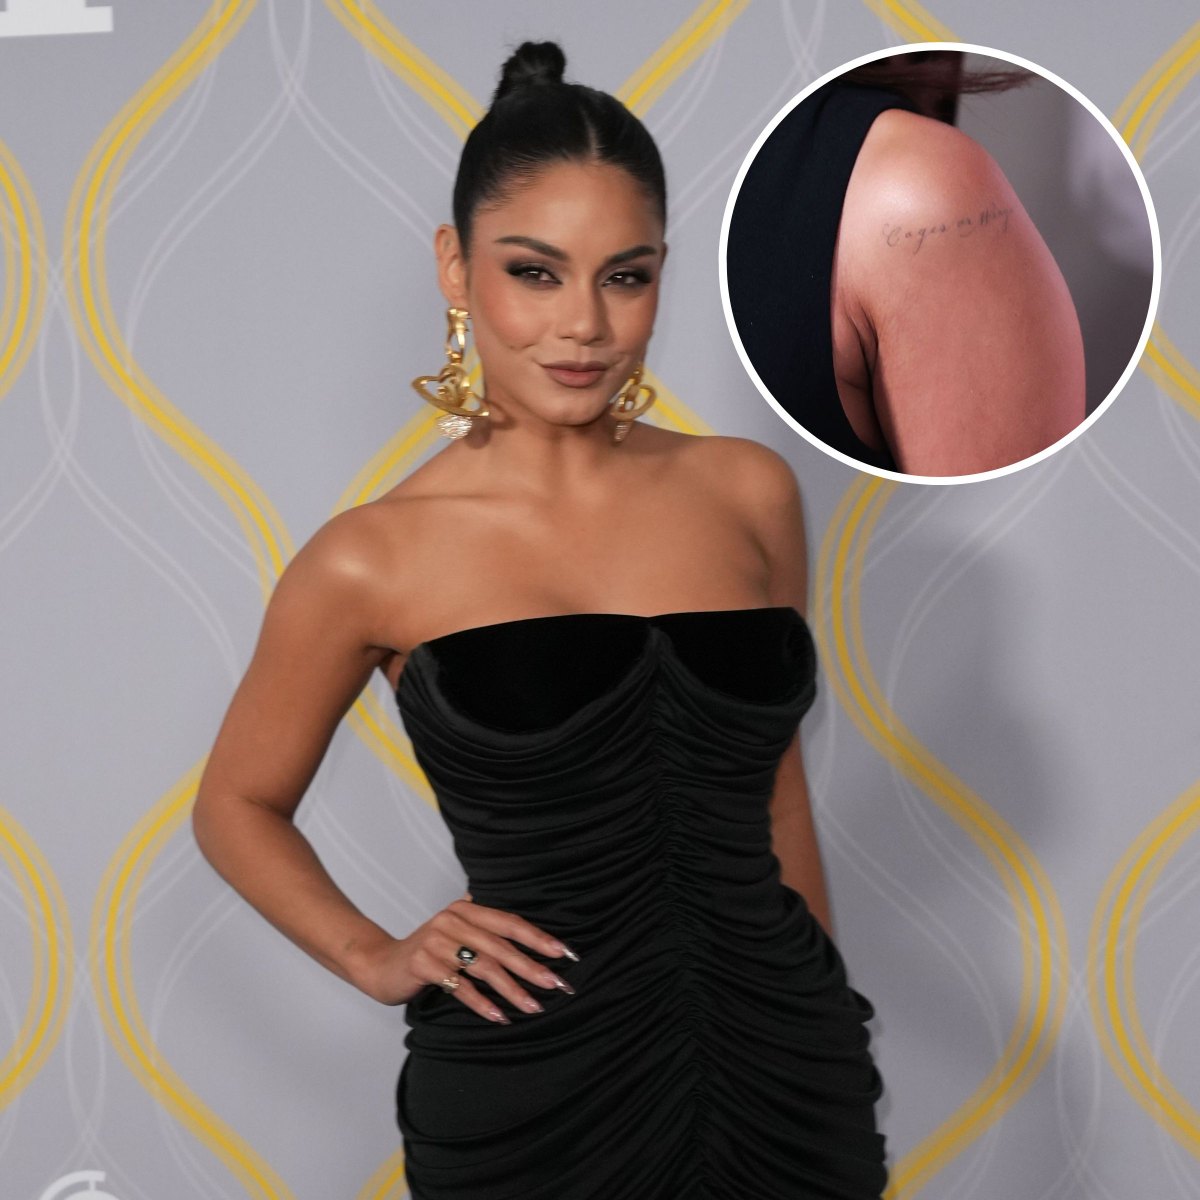 Vanessa Hudgens Tattoo Guide: Ink Designs, Meanings, Photos